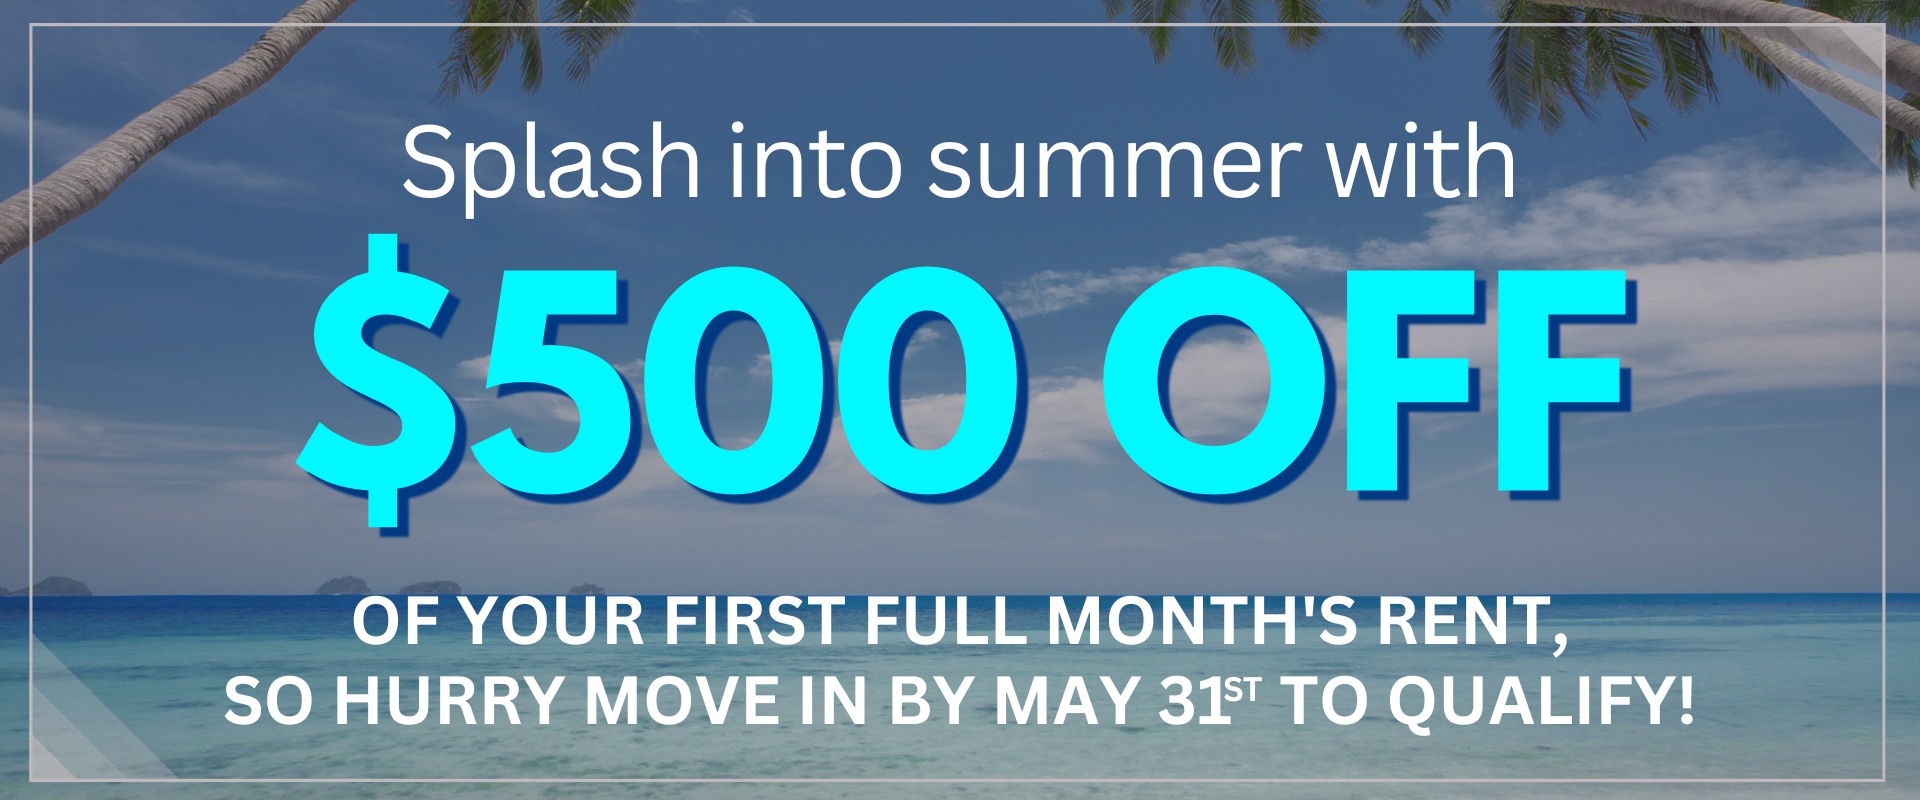 Splash into summer with $500 off of your first full month's rent , so hurry move in by May 31st to qualify!